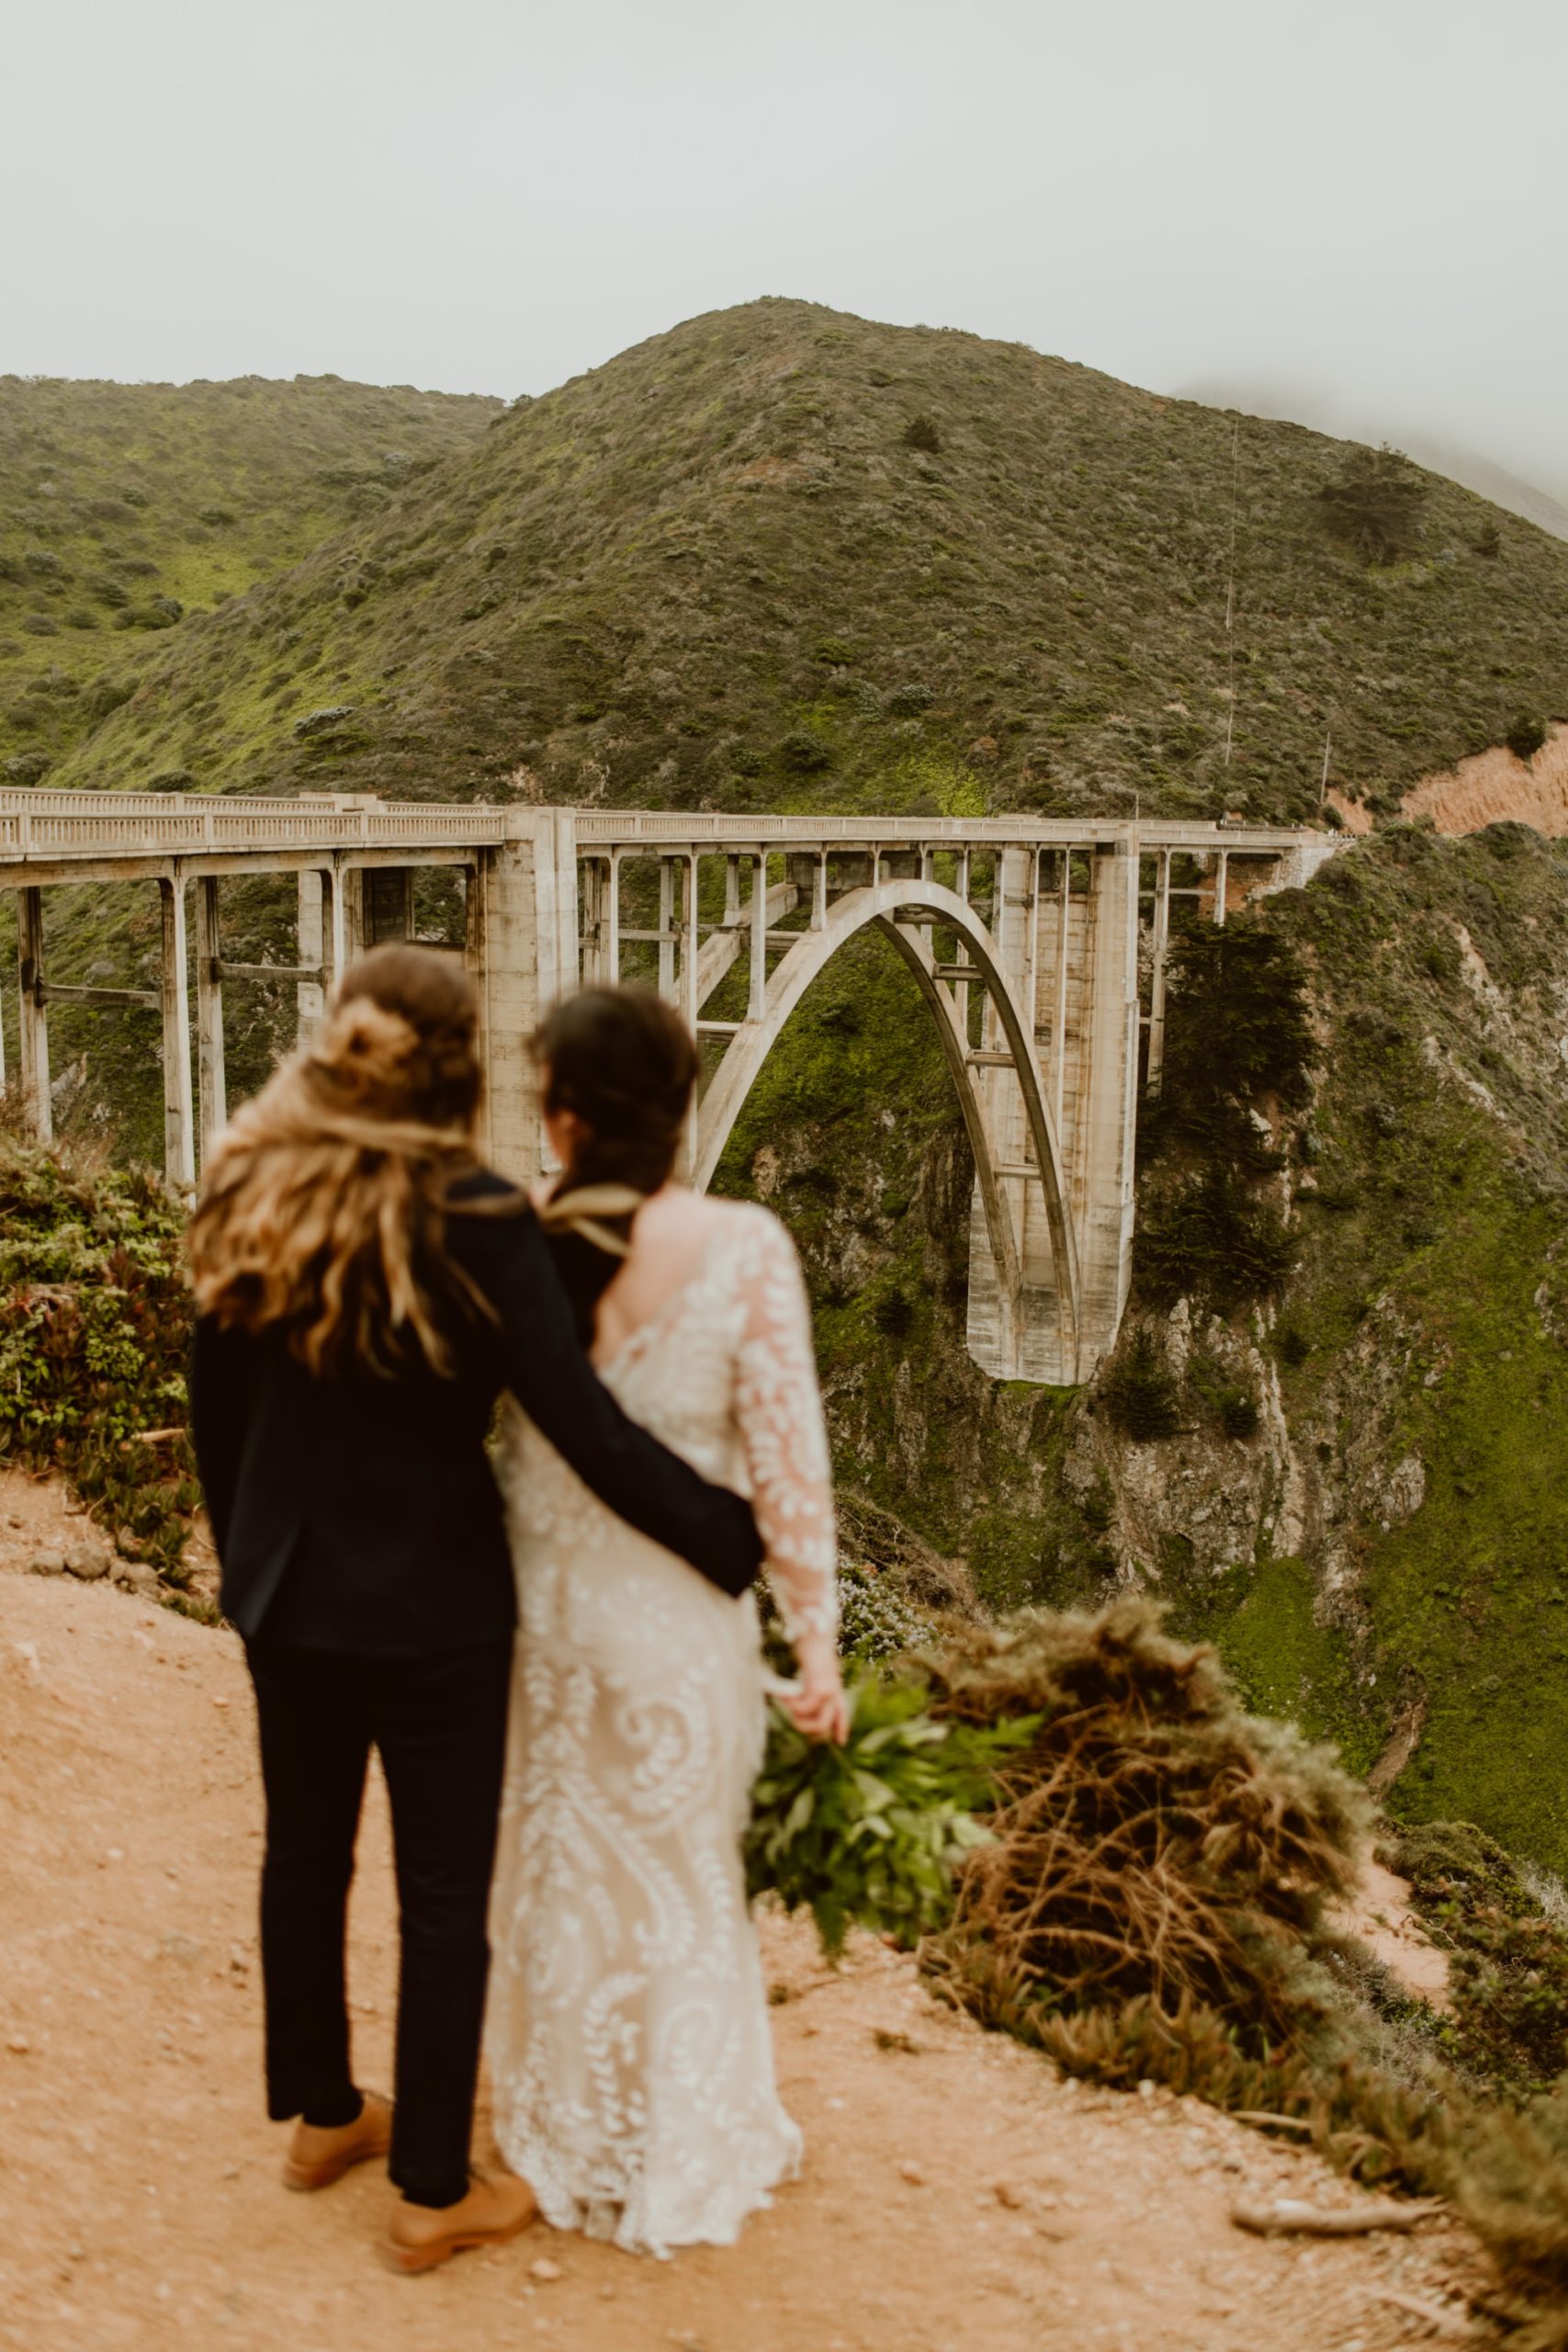 After COVID cancelled their wedding, Jillian and Shay opted into a Big Sur elopement with a stop at Bixby Bridge. You won't want to miss their epic coastal mountaintop photos!